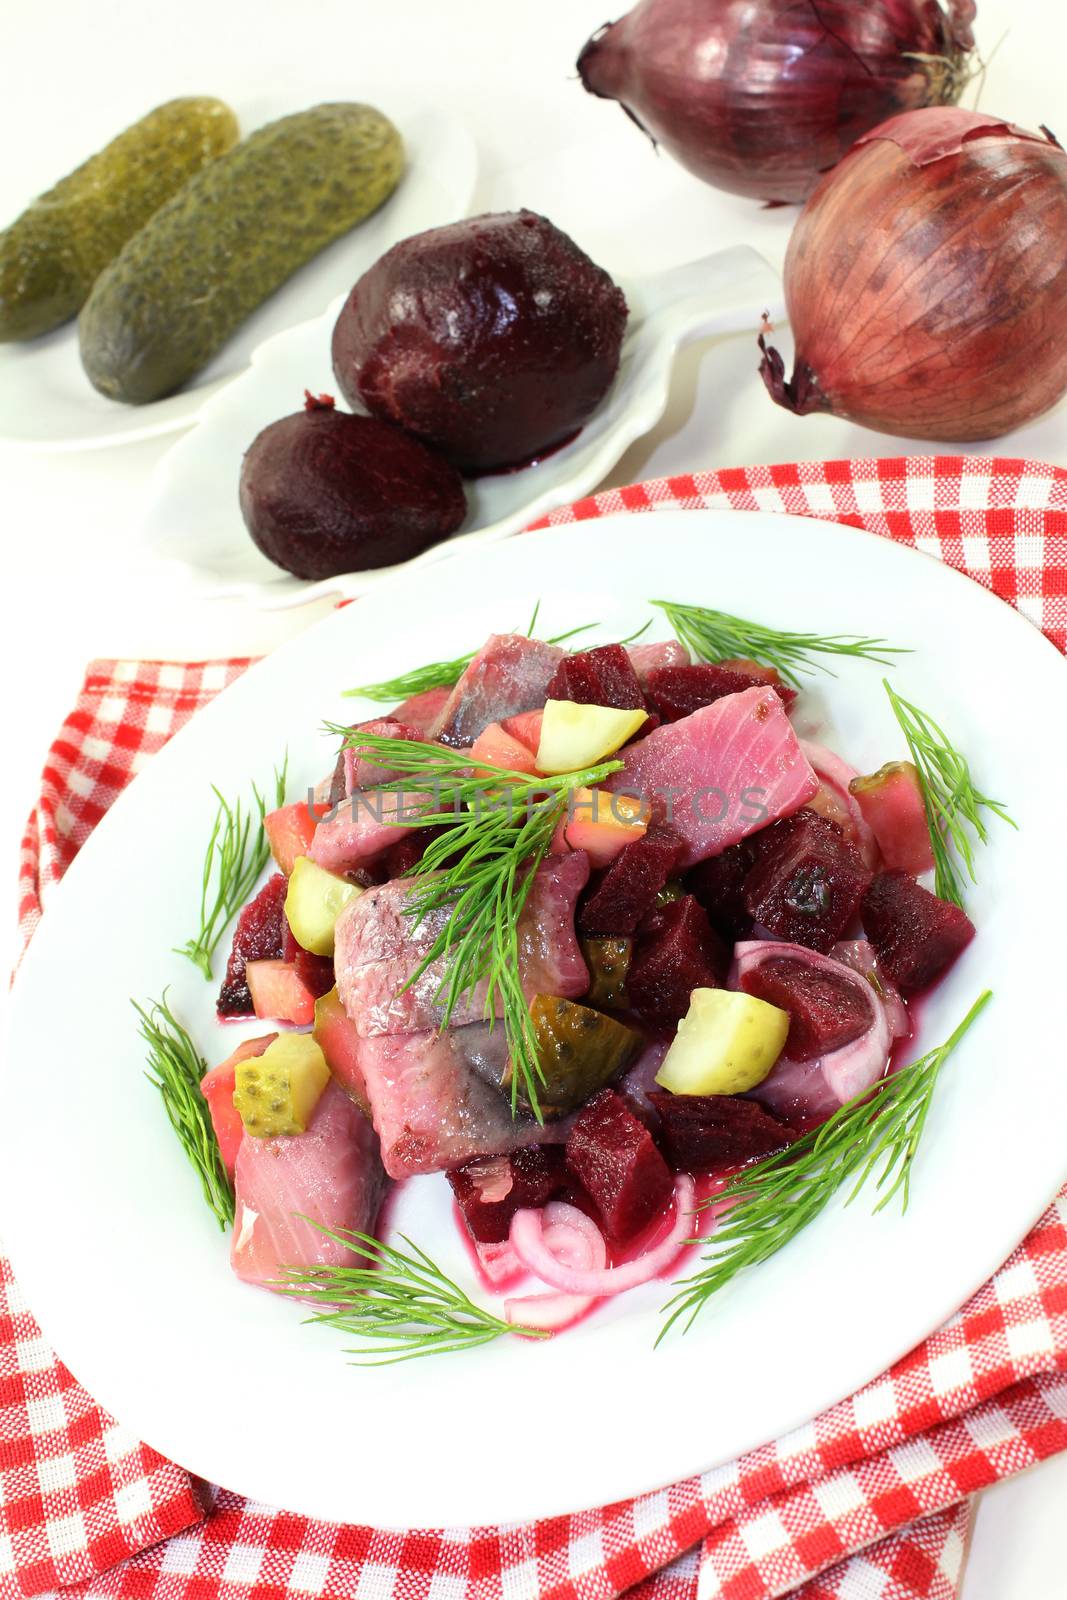 Matie salad with beetroot, onions and pickles